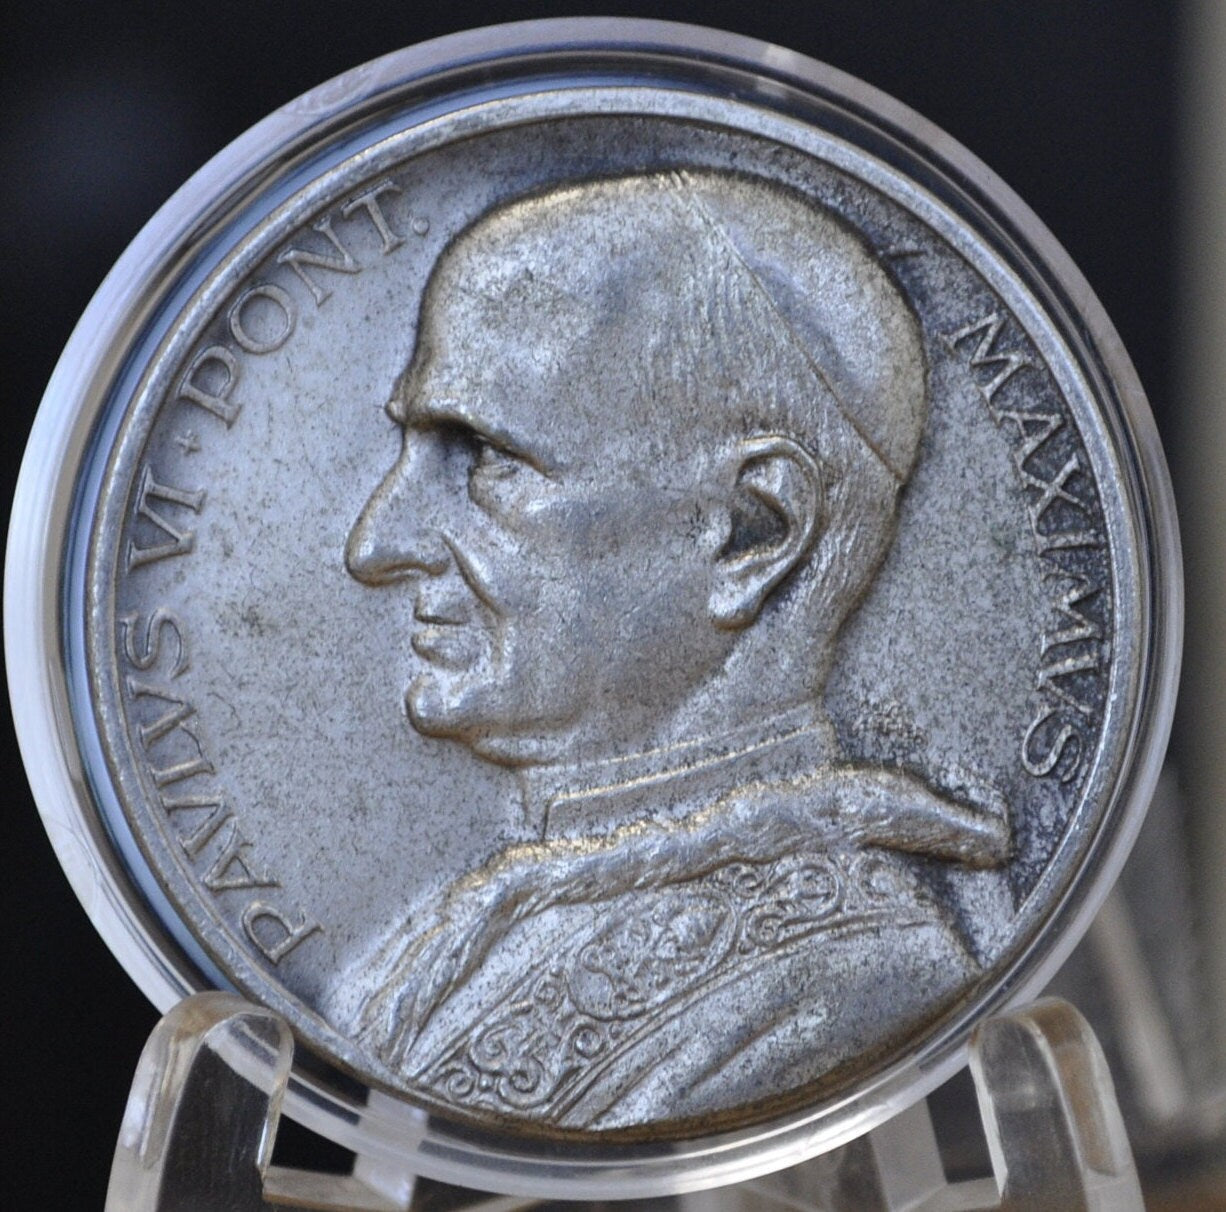 1964 Pope Paul VI Medal - Large Medal - Pavlvs VI Medal - Catholic Medallion - Great For Gifts and Jewelry